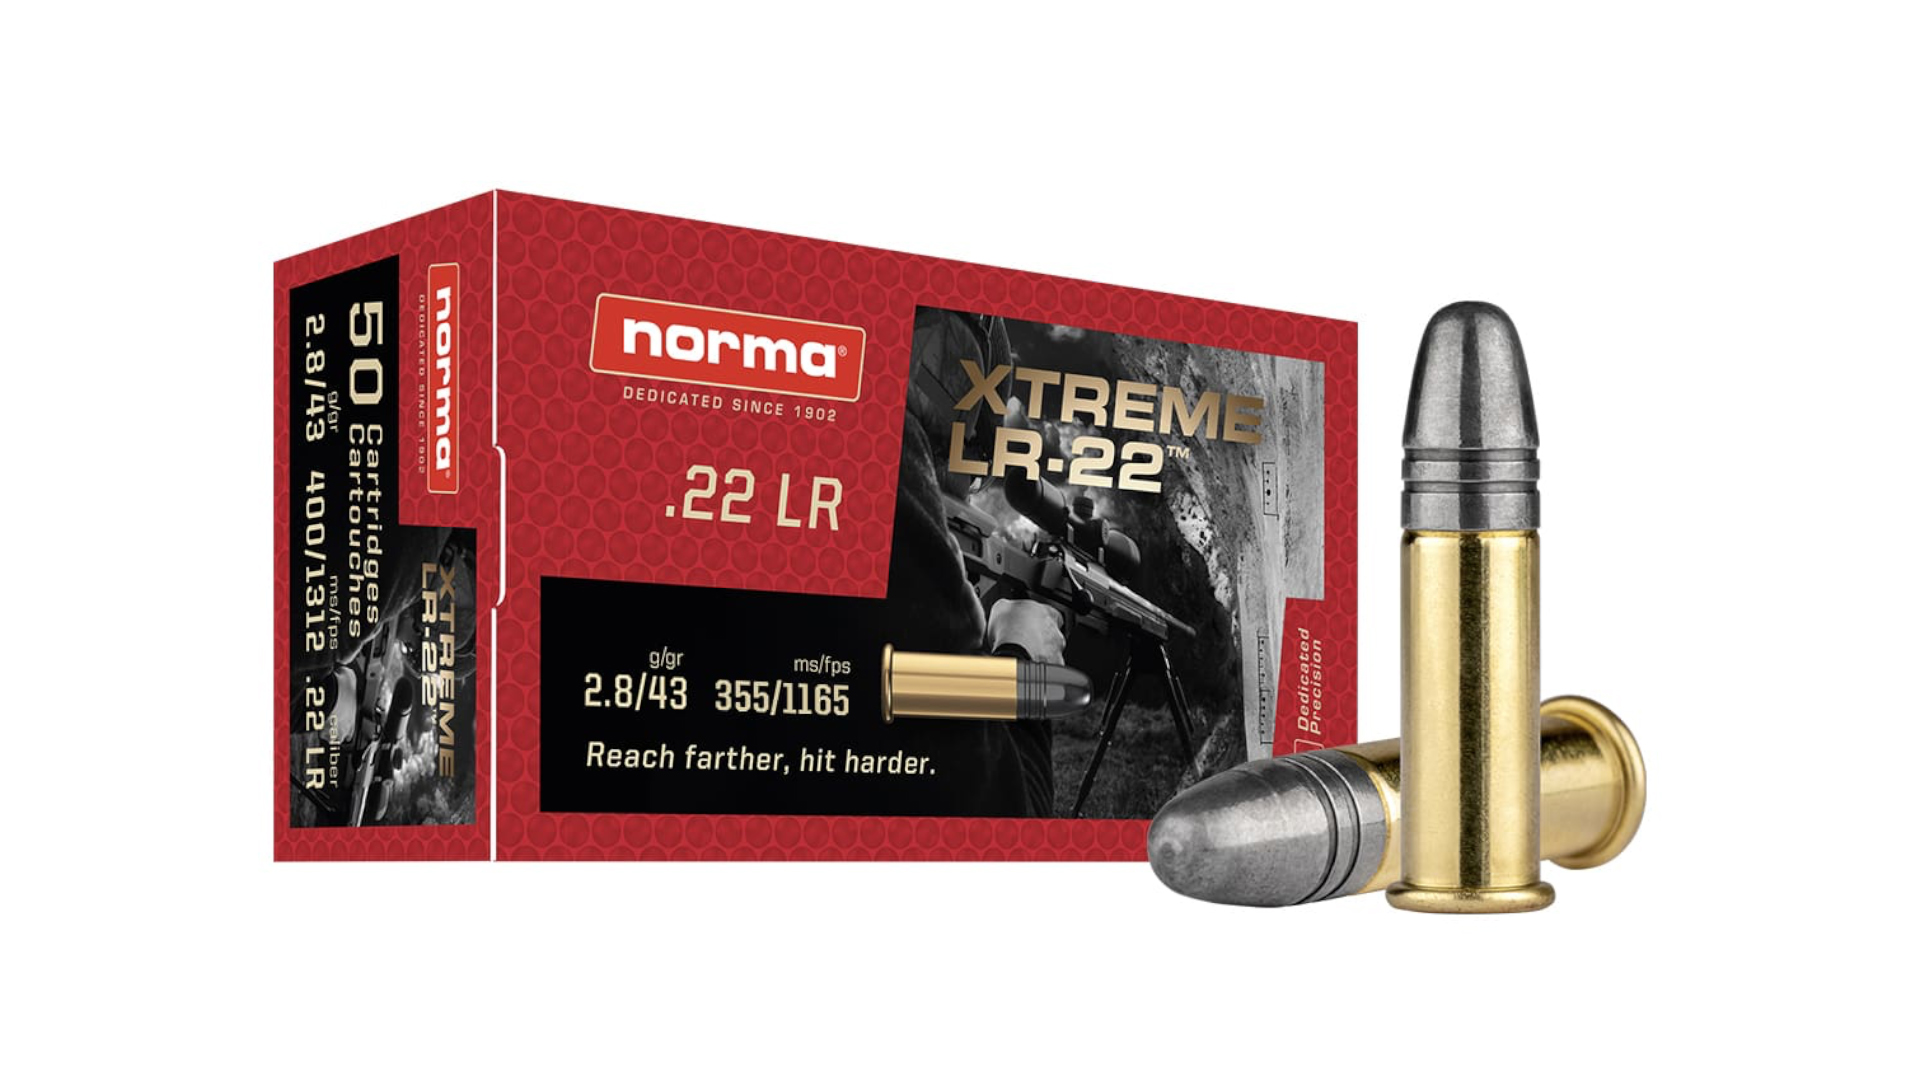 Norma Xtreme LR-22